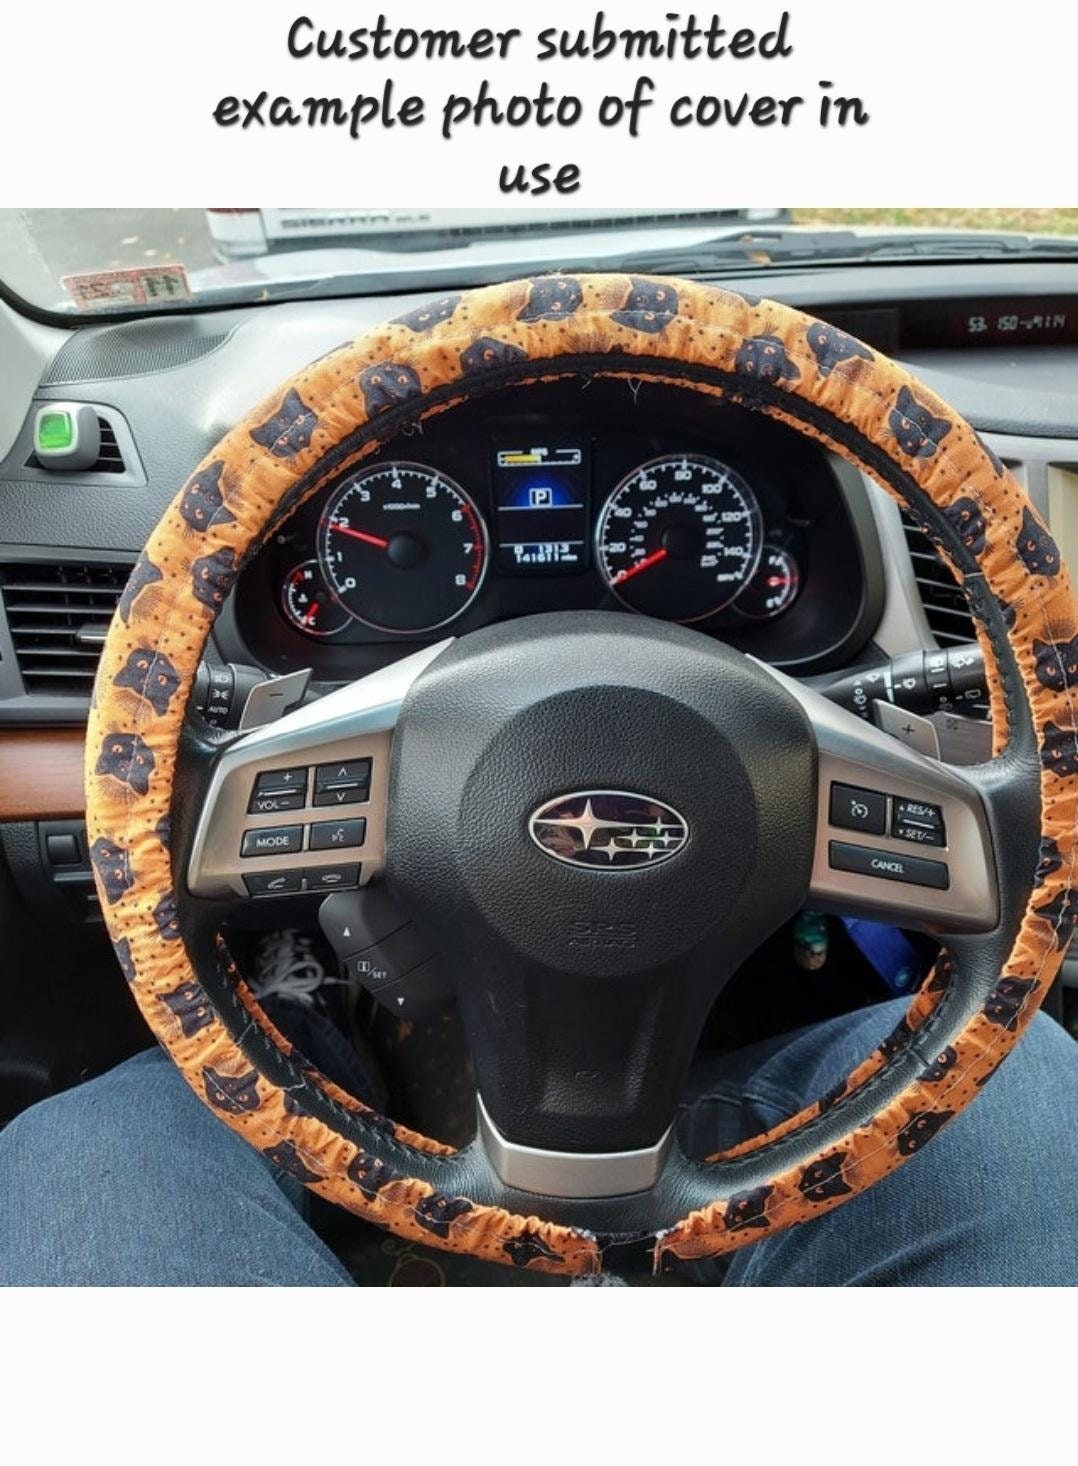 Arrow Steering Wheel Cover, Custom Handmade Car Accessories - Harlow's Store and Garden Gifts